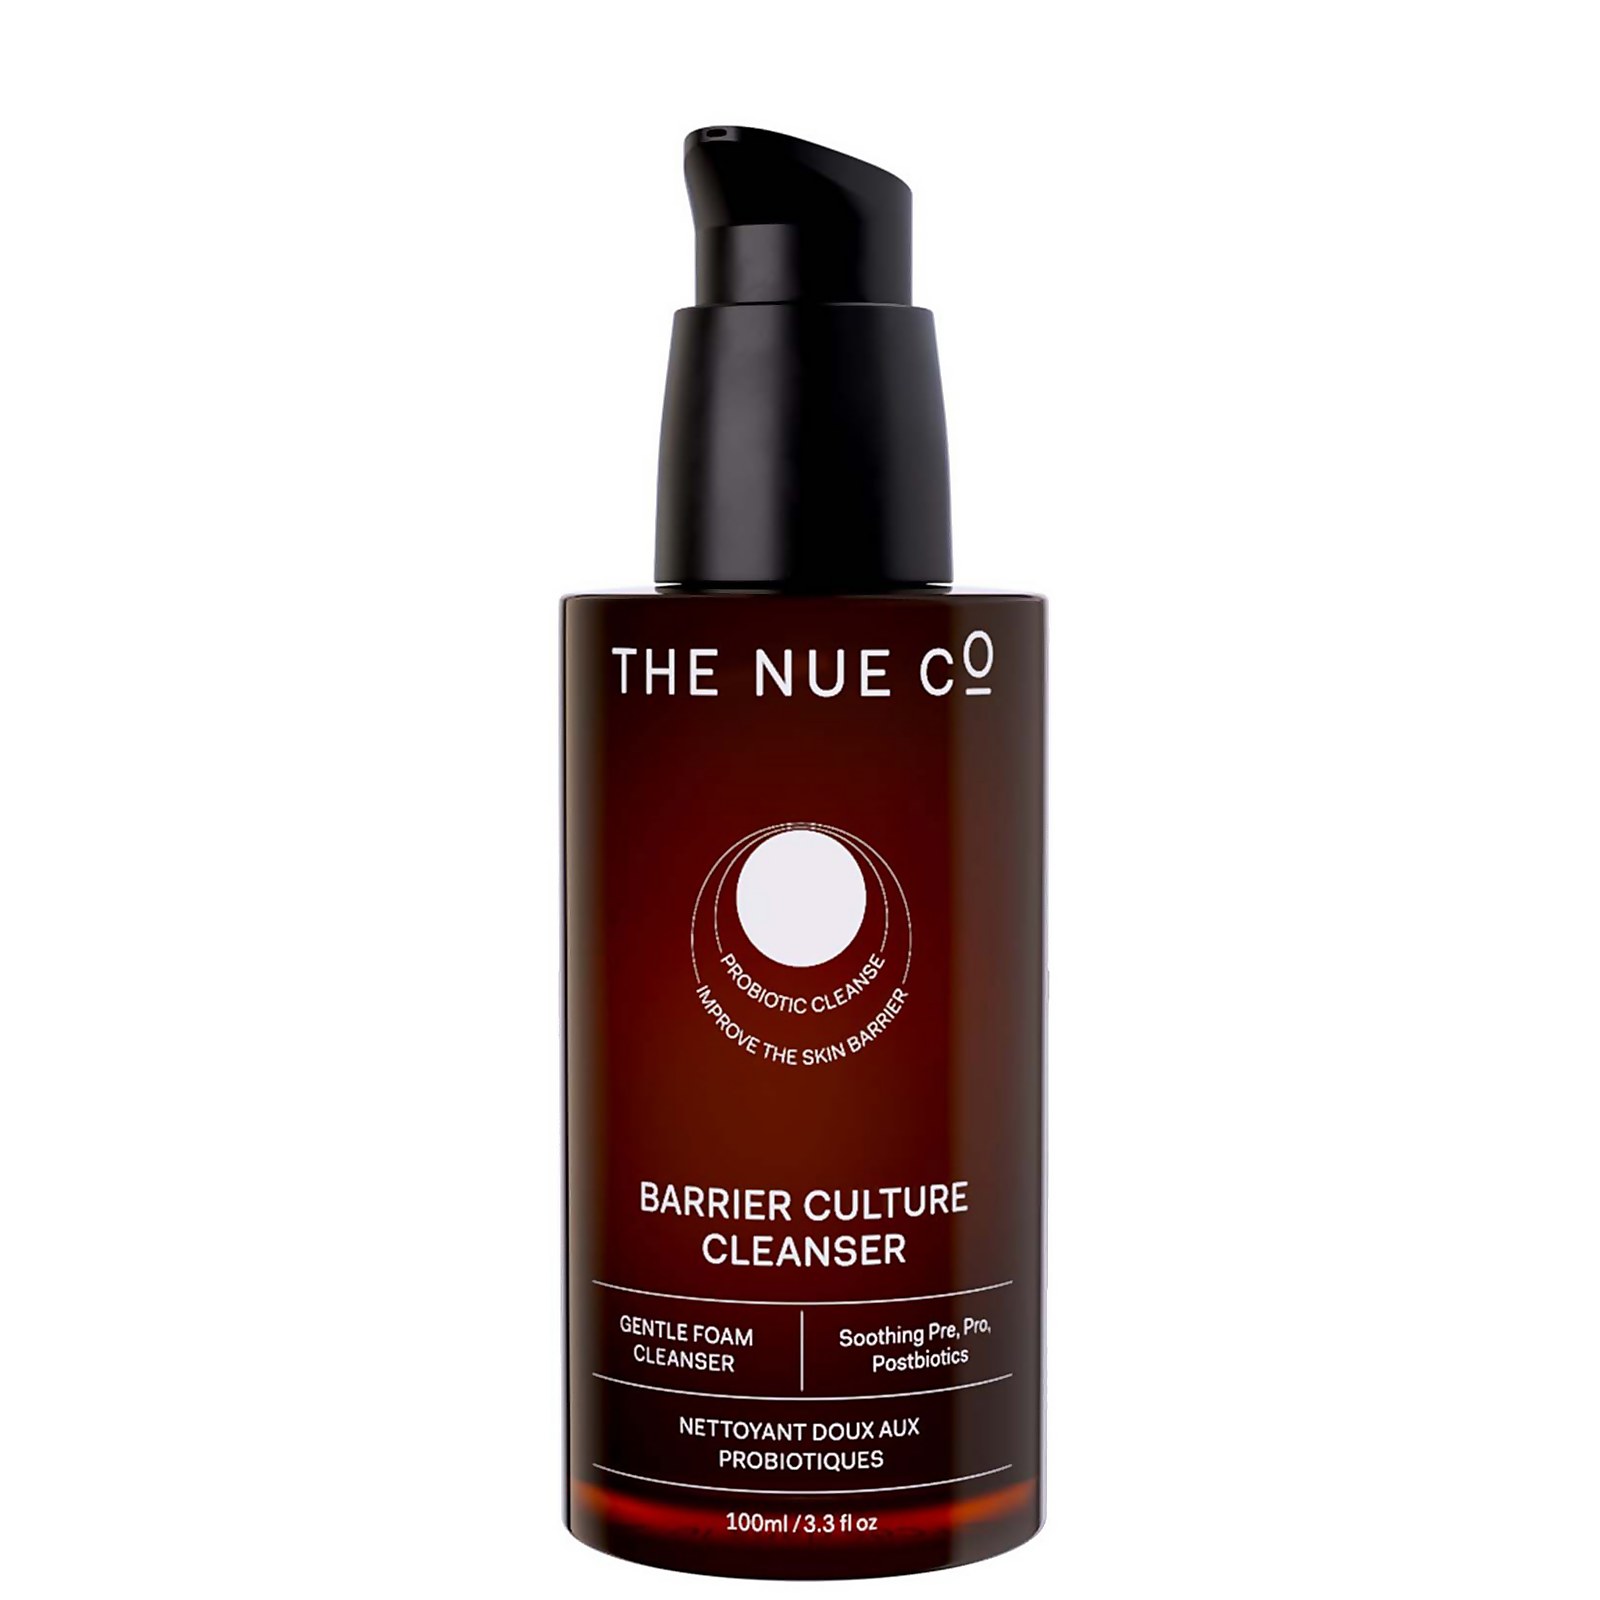 The Nue Co Barrier Culture Cleanser 100ml